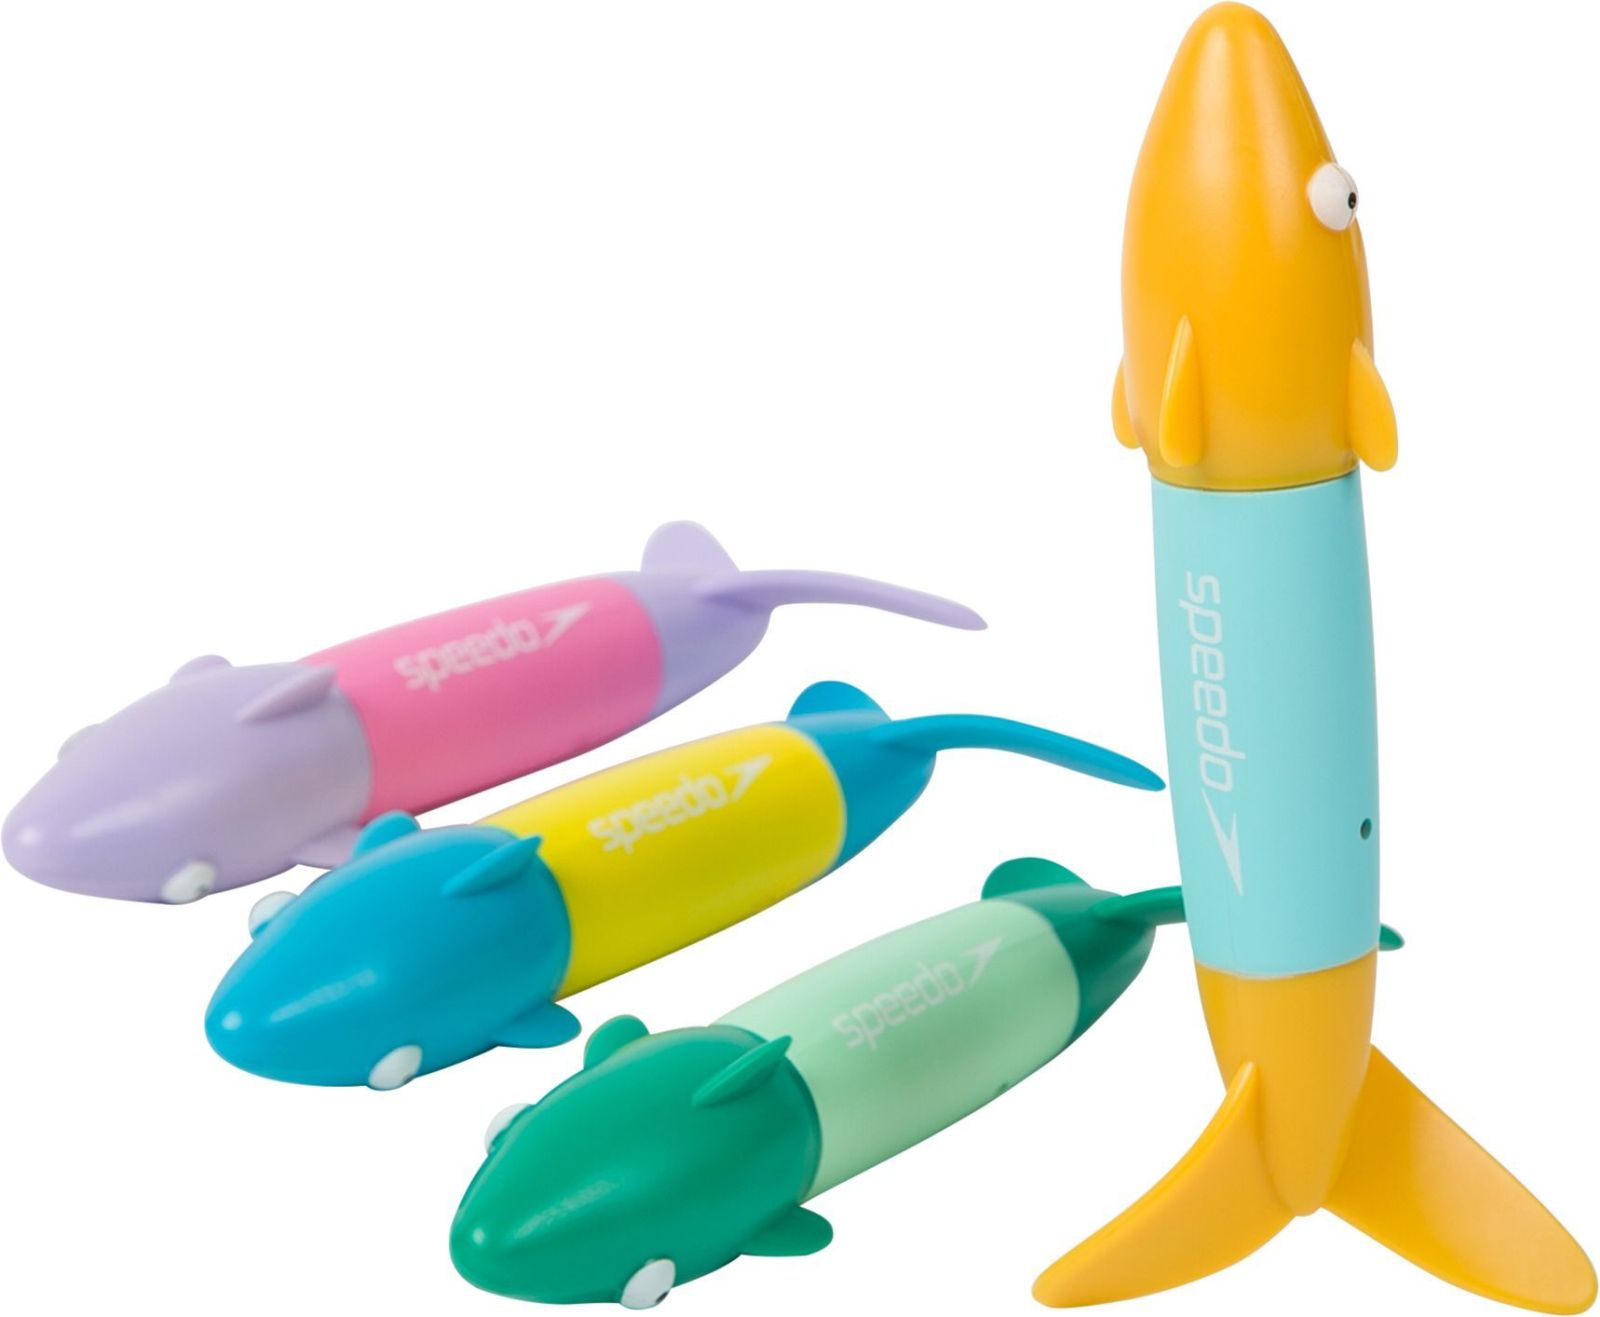 Speedo Spinning Dive Toys - assorted pastel